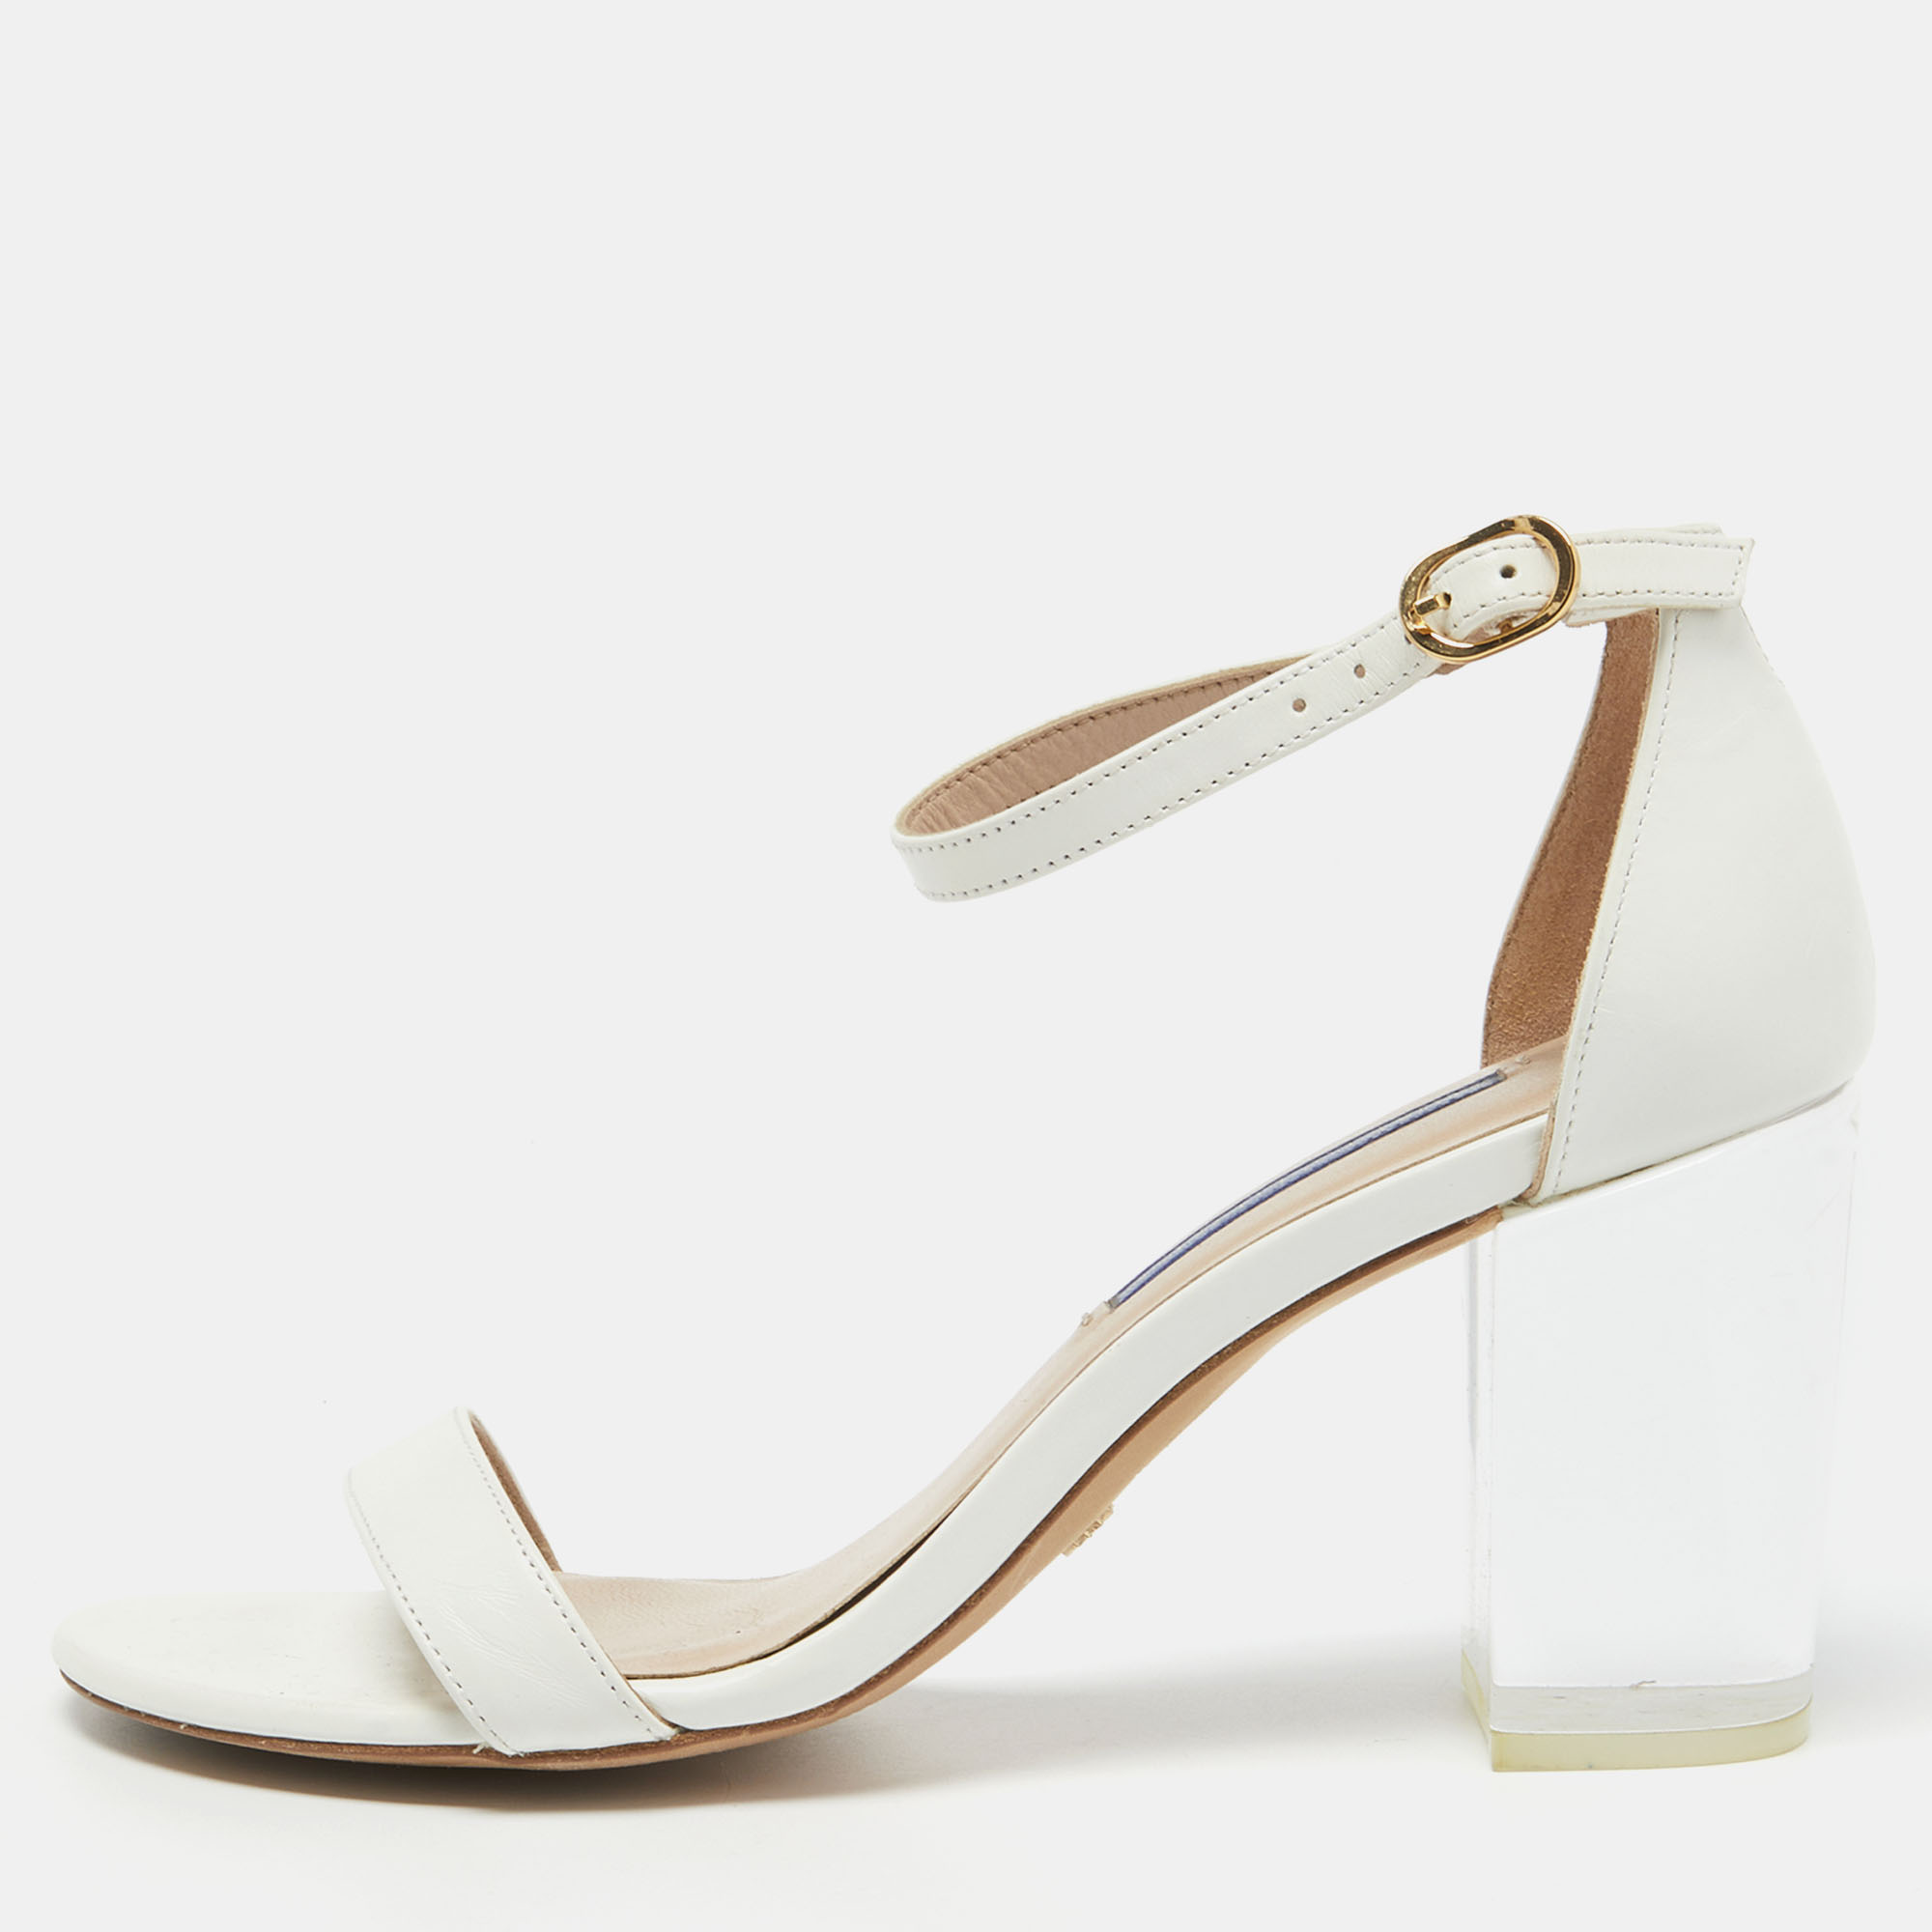 Pre-owned Stuart Weitzman White Leather Ankle Strap Sandals Size 36.5